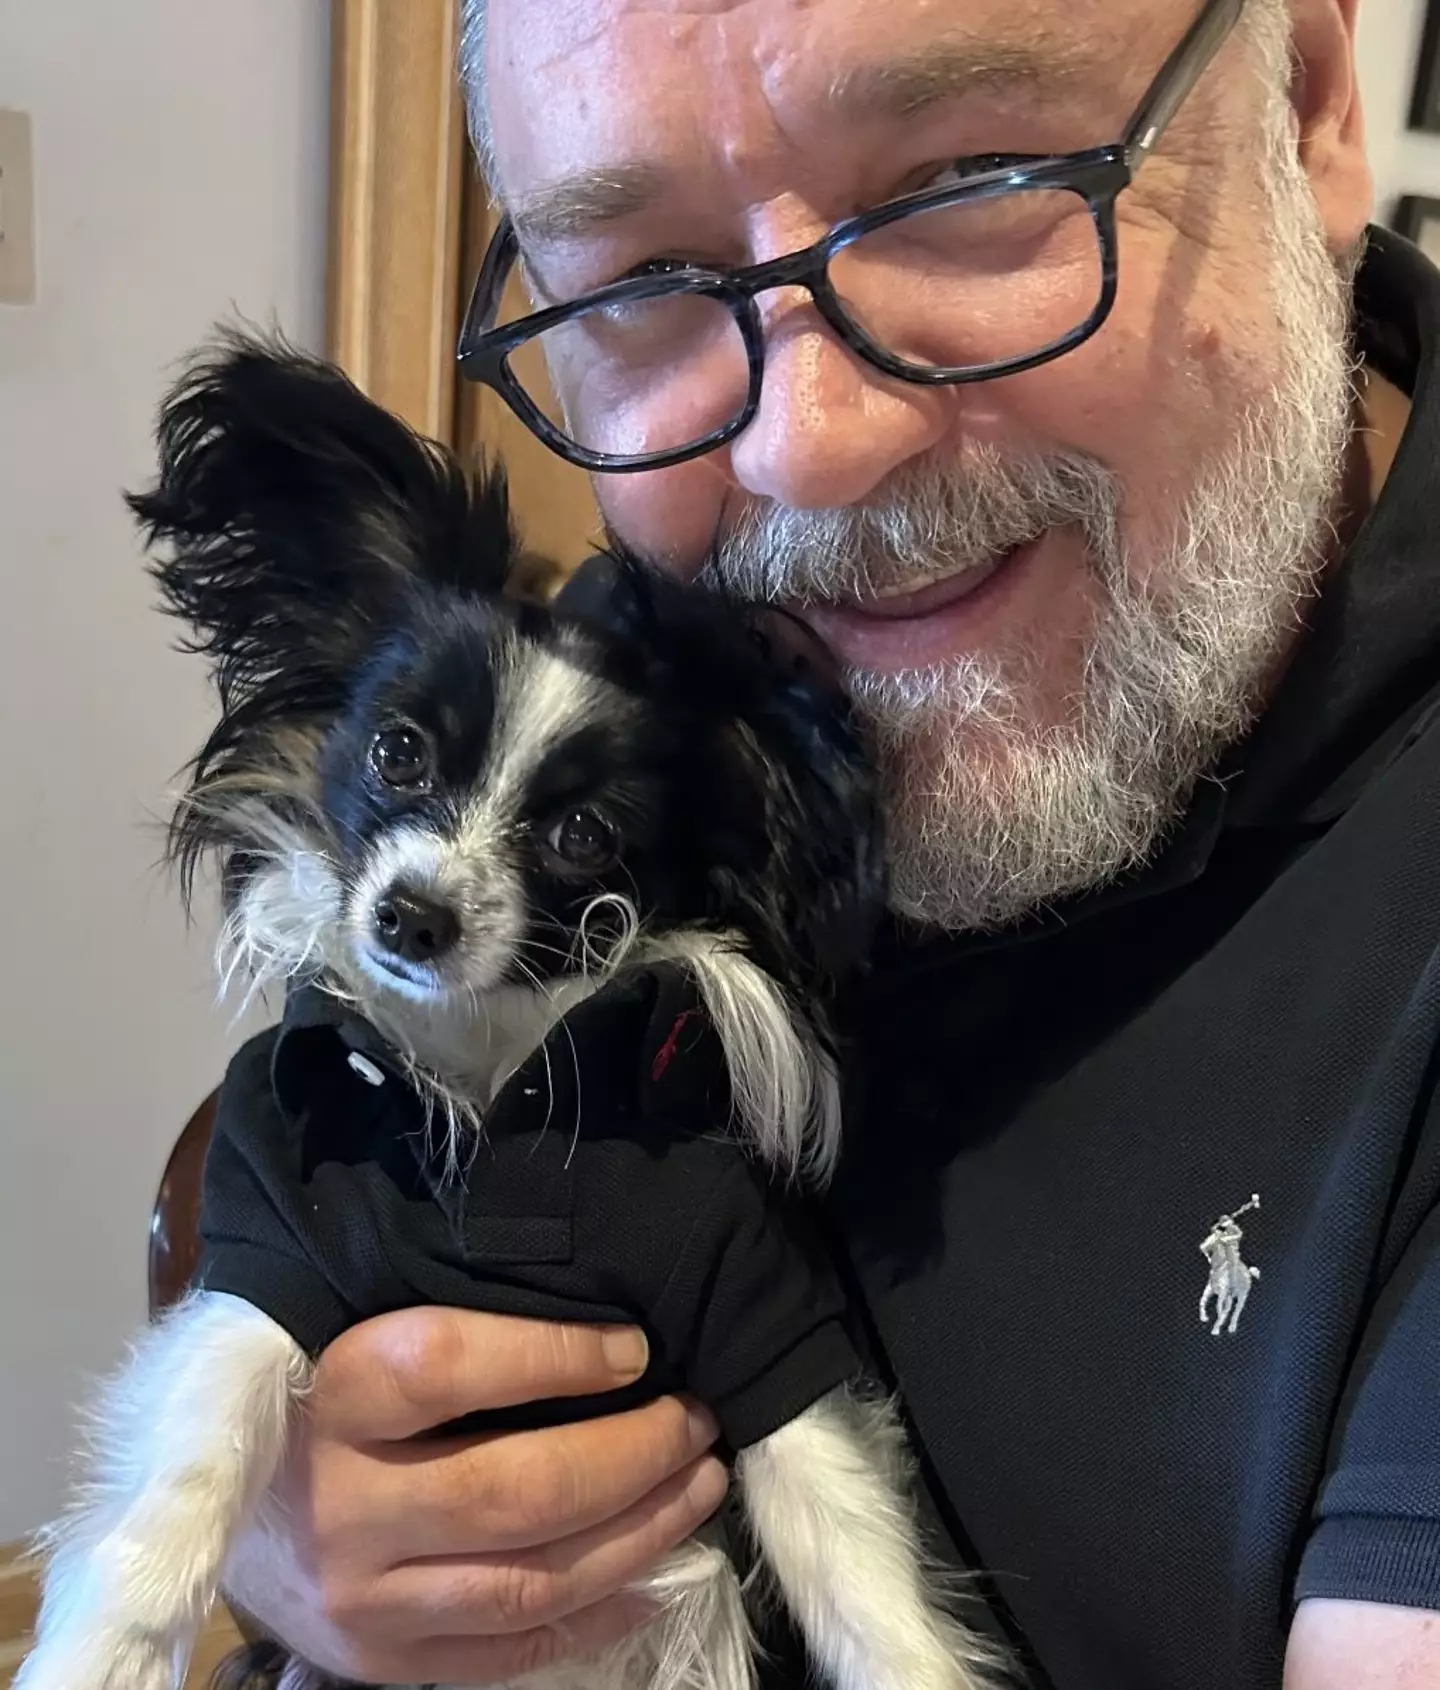 Russell Crowe said he was 'devastated' at the death of his puppy Louis.